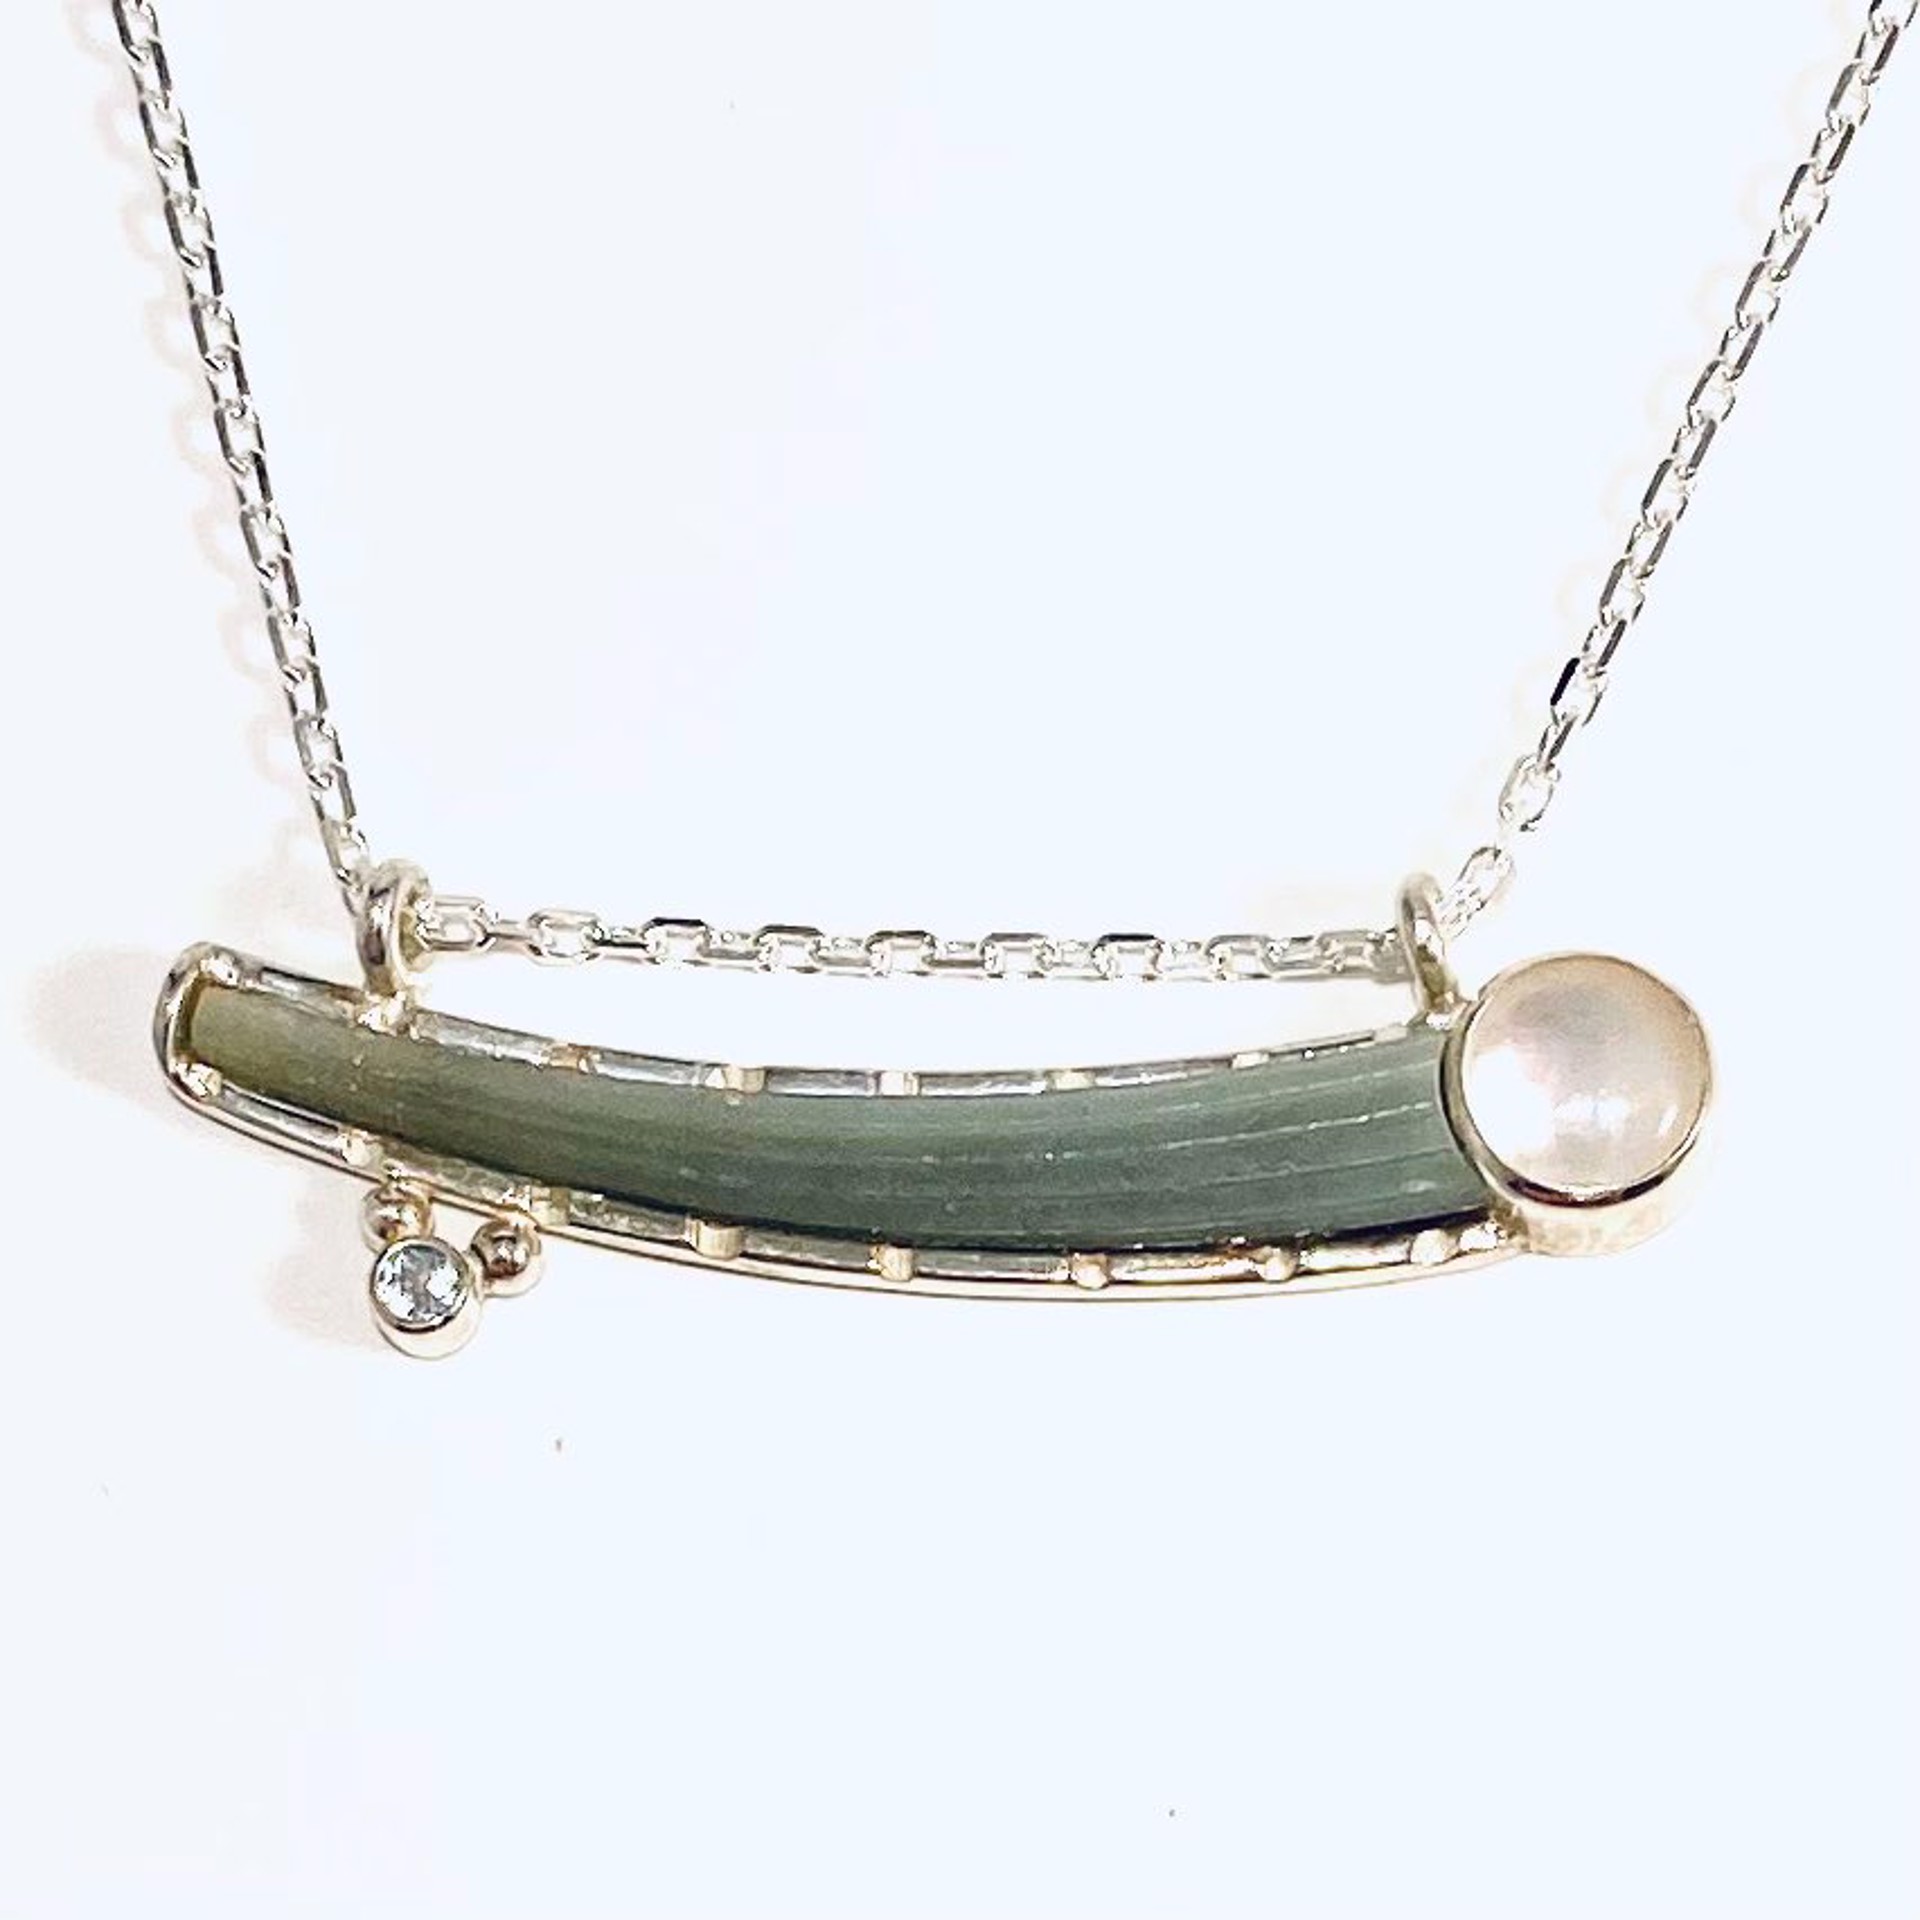 BU22-18 Tusk Shell Mother of Pearl Swiss Blue Topaz Pendant on 18" Adjustable Silver Chain Necklace by Barbara Umbel